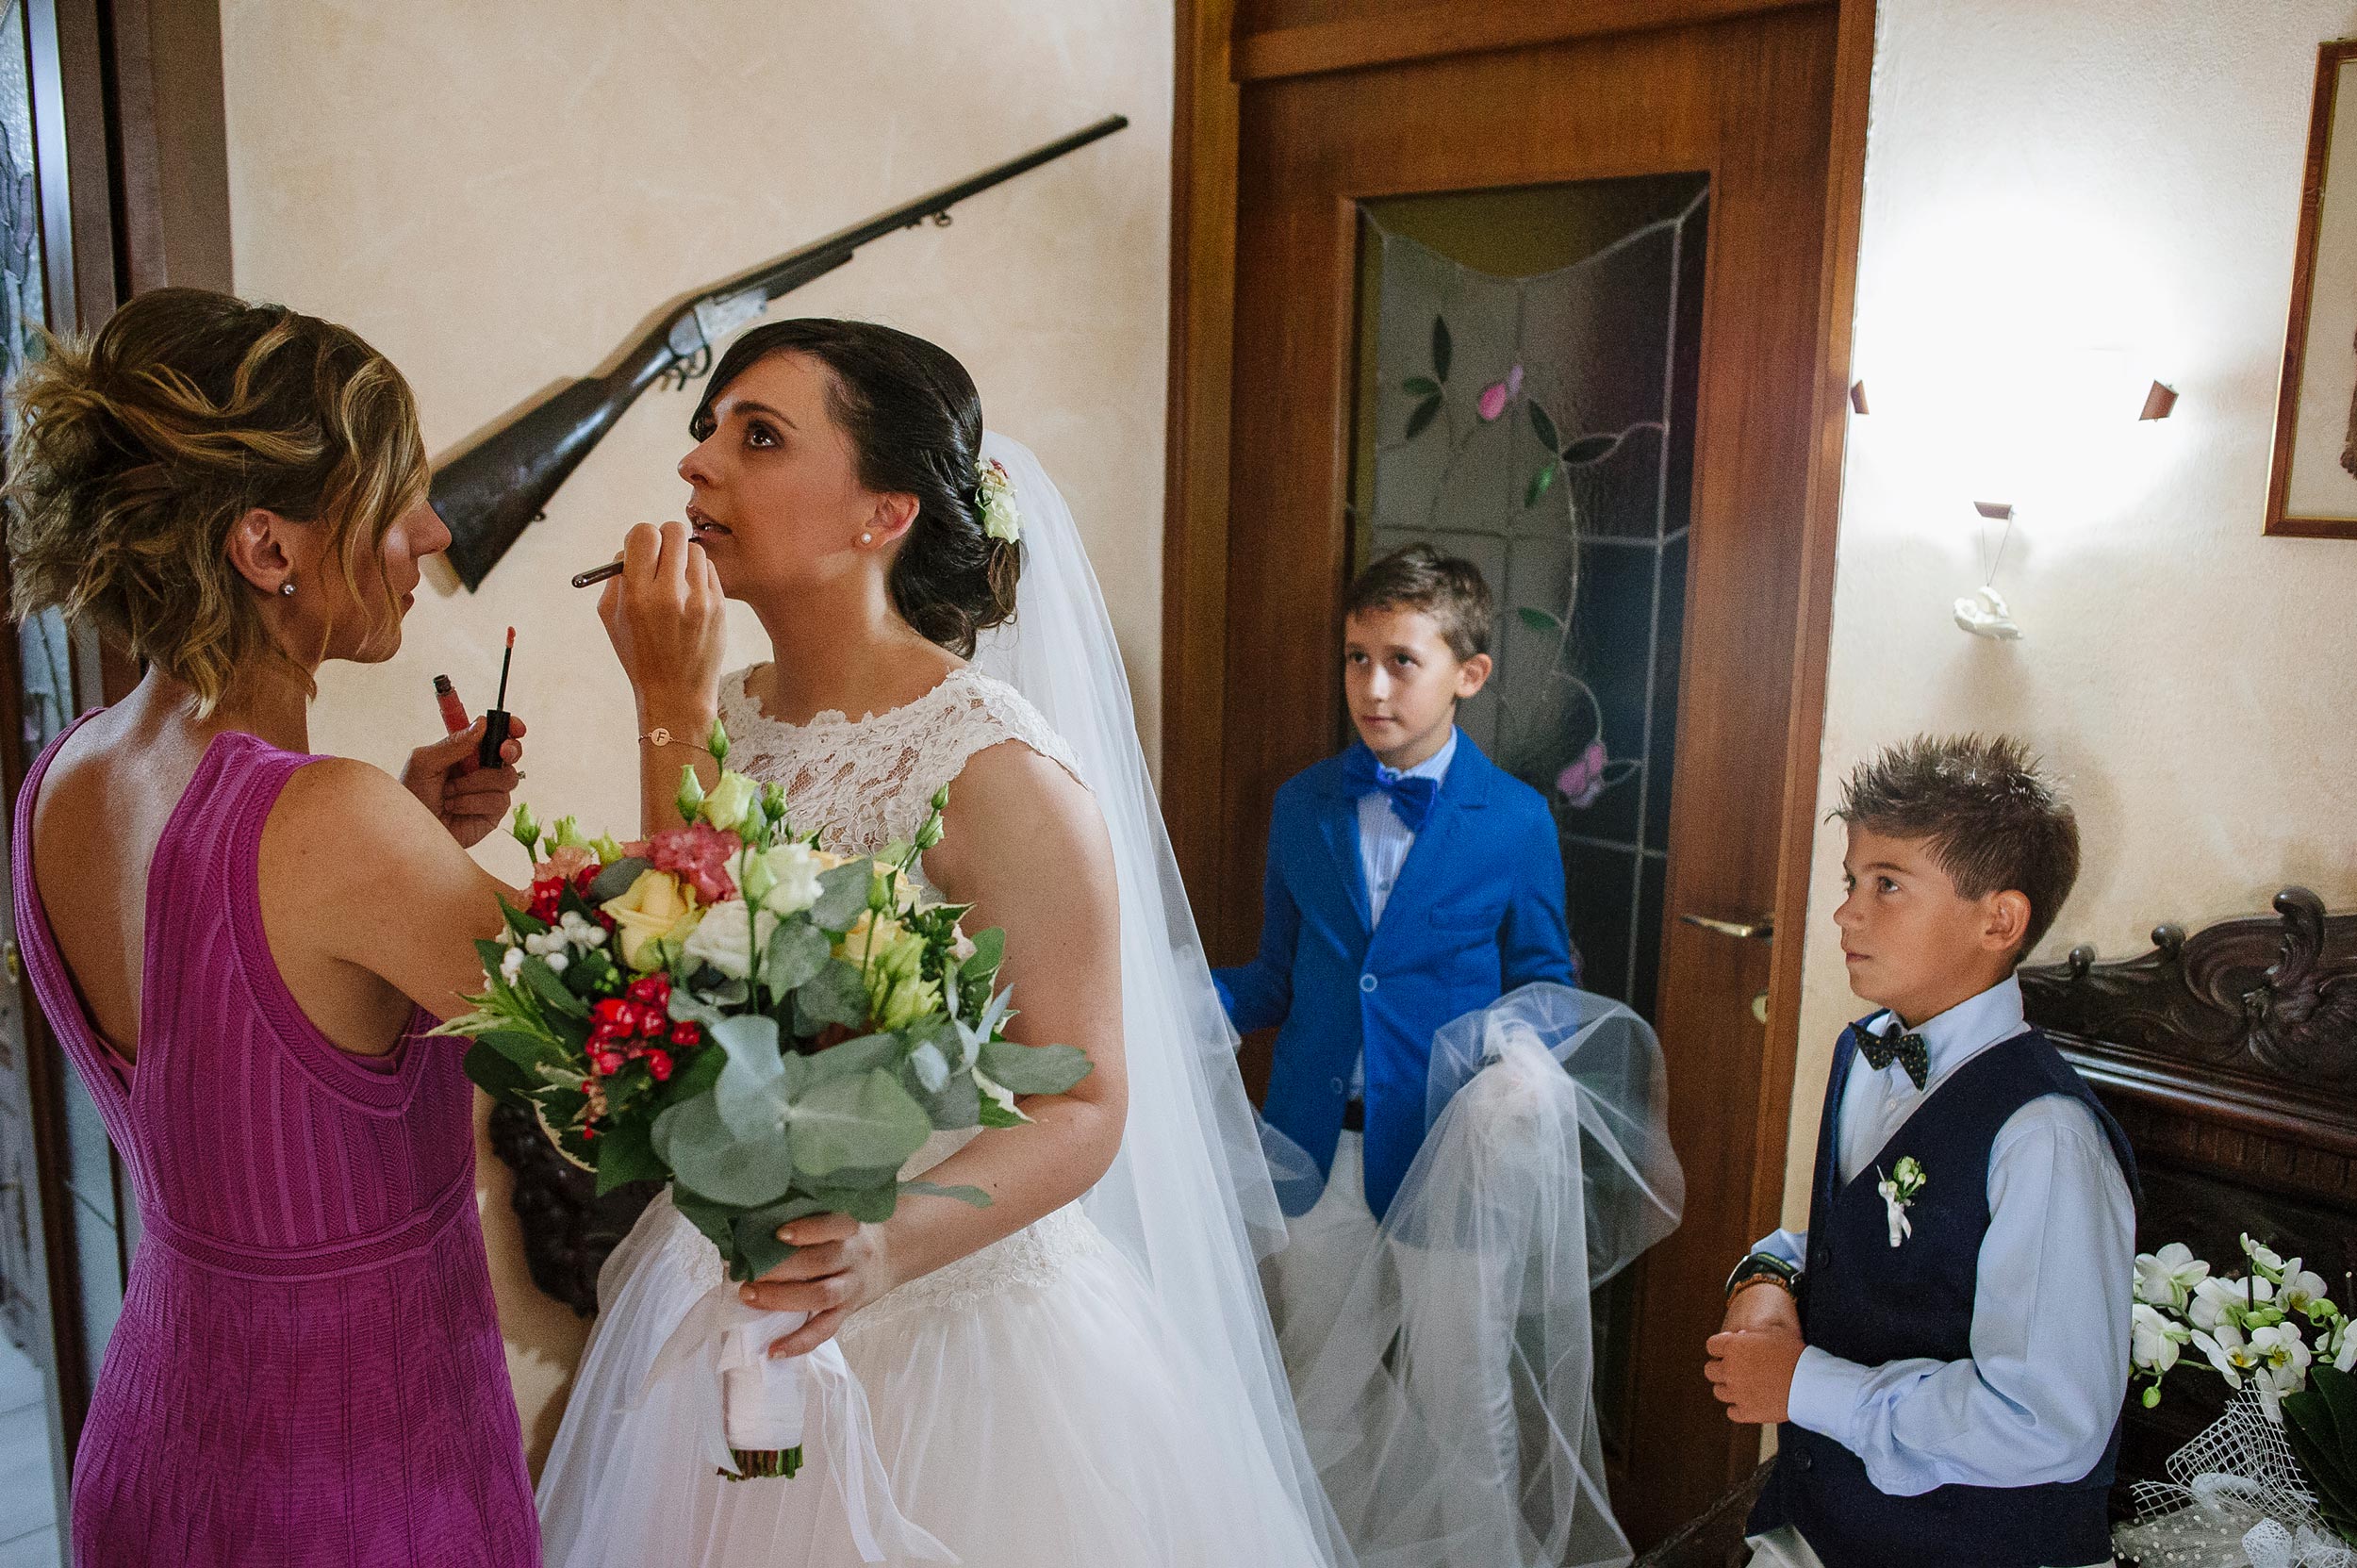 bride-doing-last-make-up-retouches-rifle-on-the-wall-kids-holding-the-veil.jpg